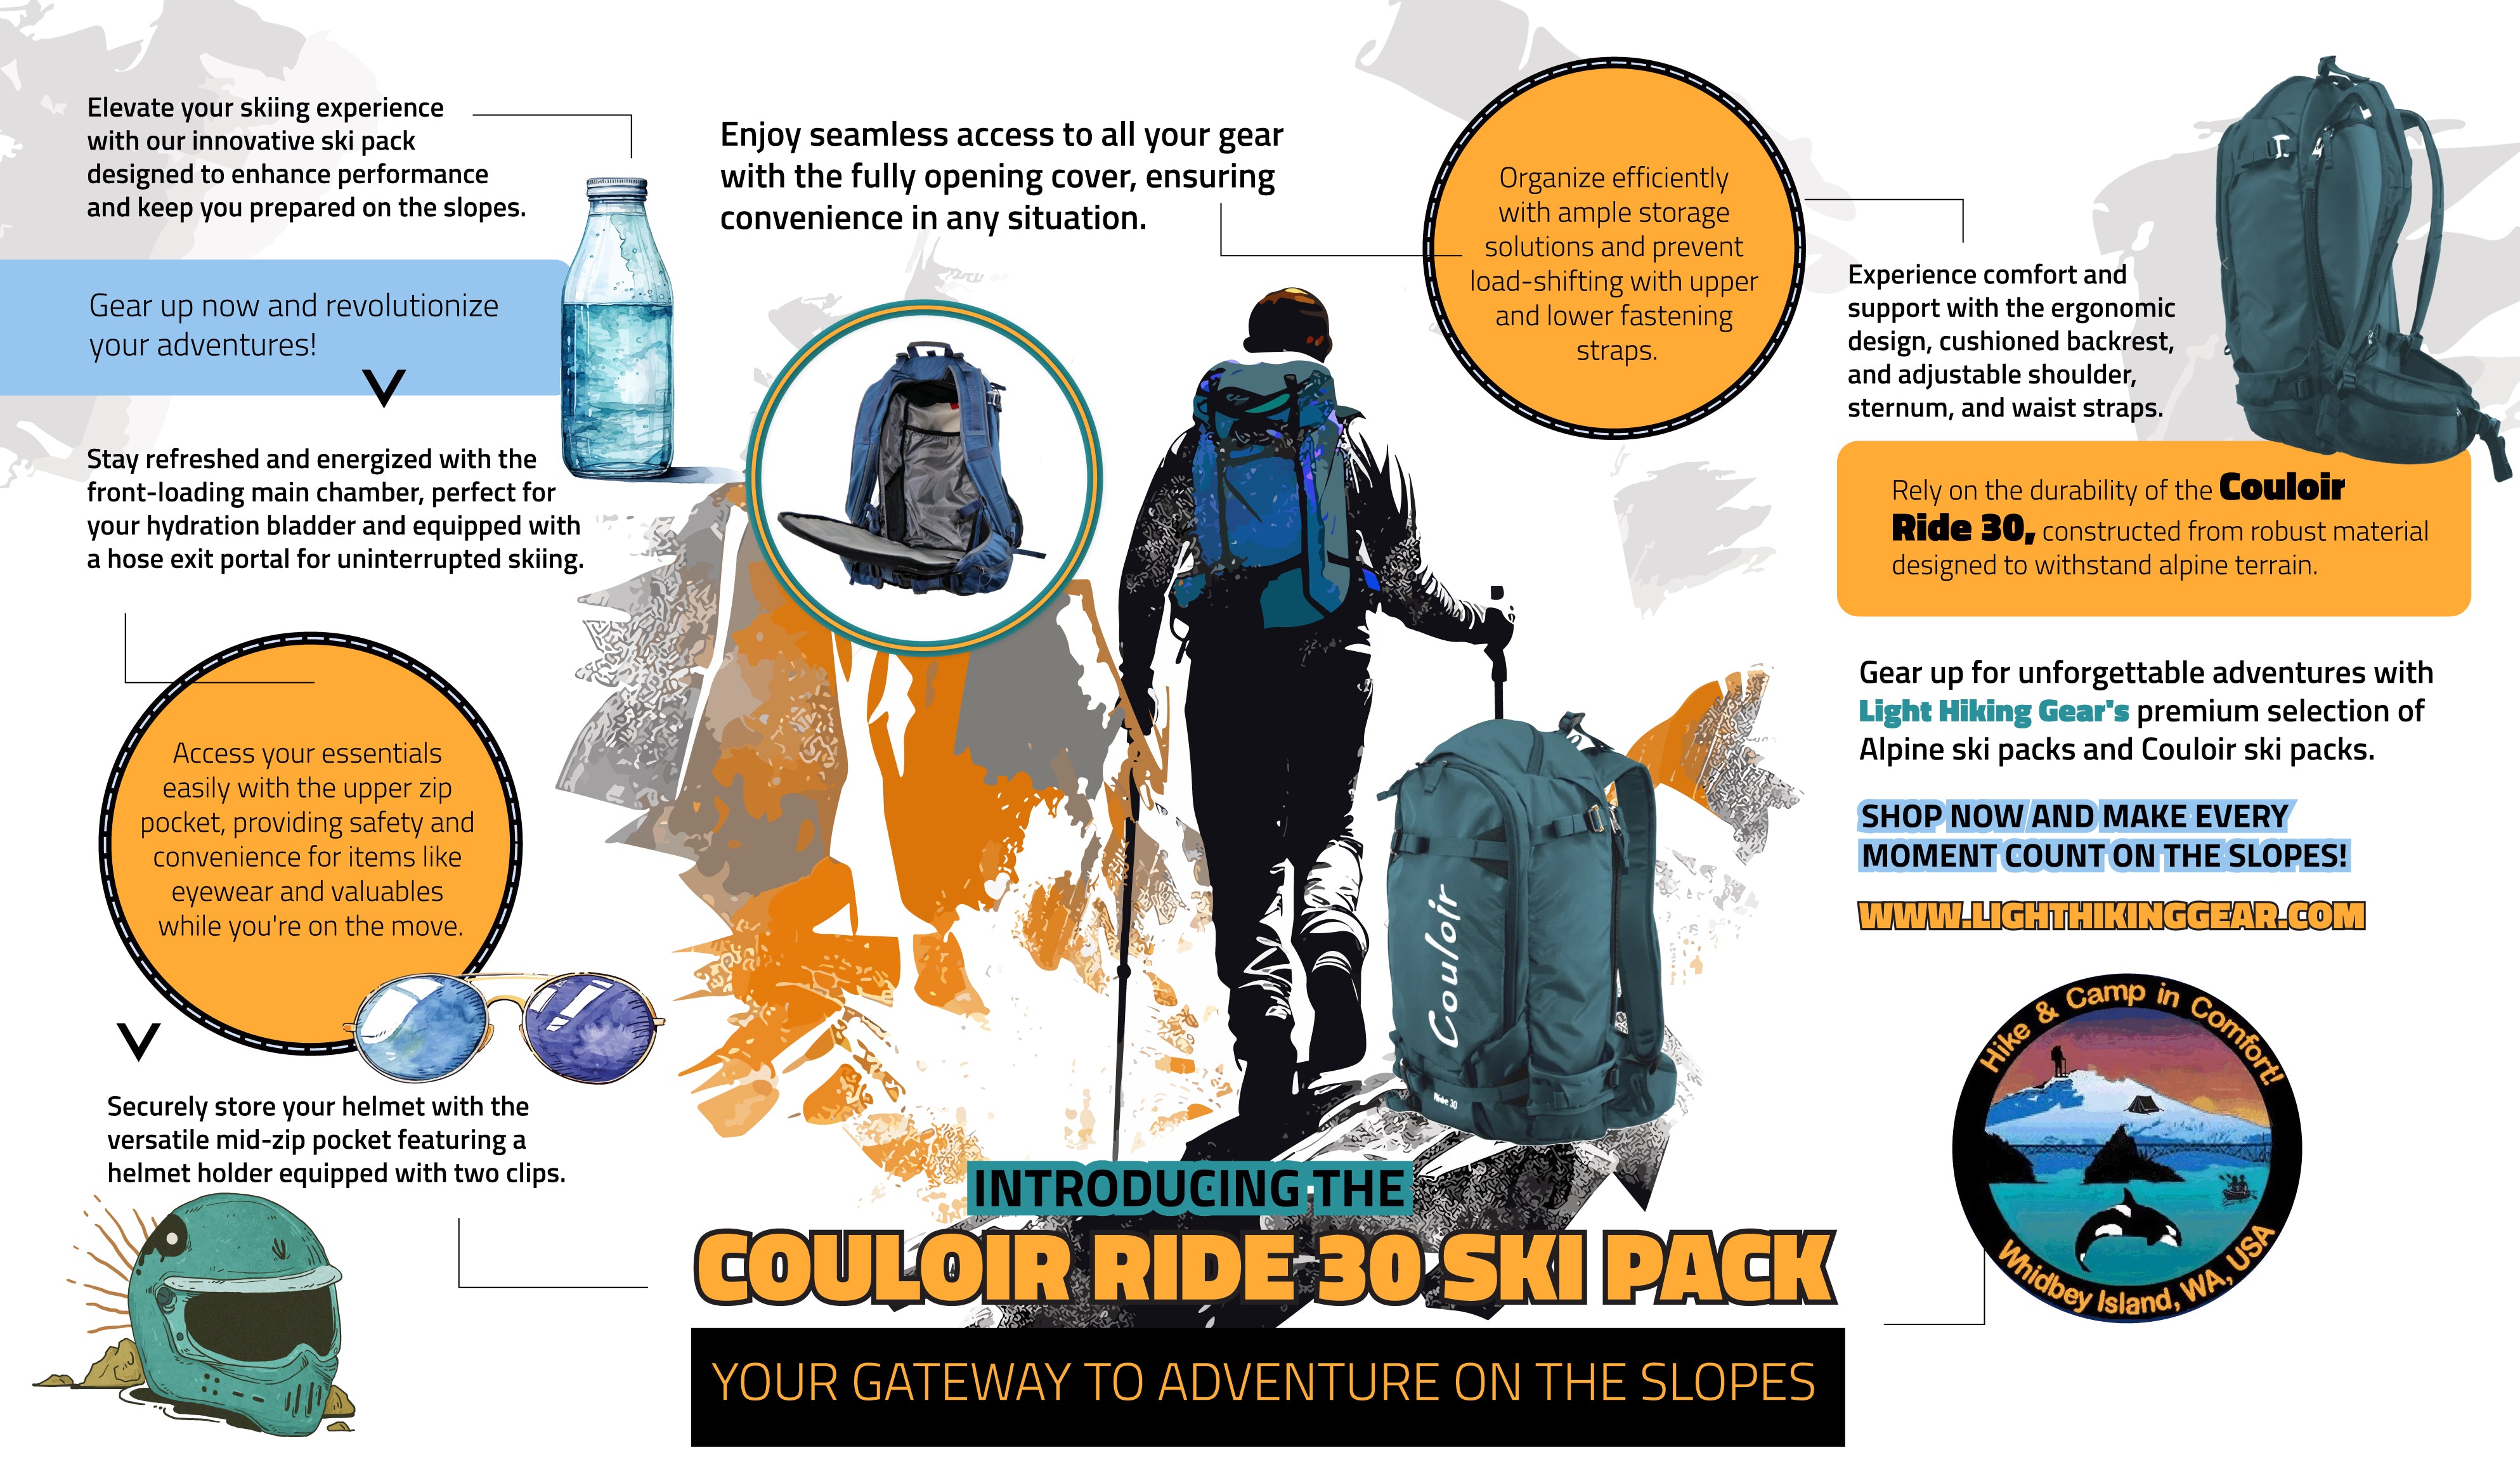 Introducing The Couloir Ride 30 Ski Pack – Your Gateway to Adventure on the Slopes